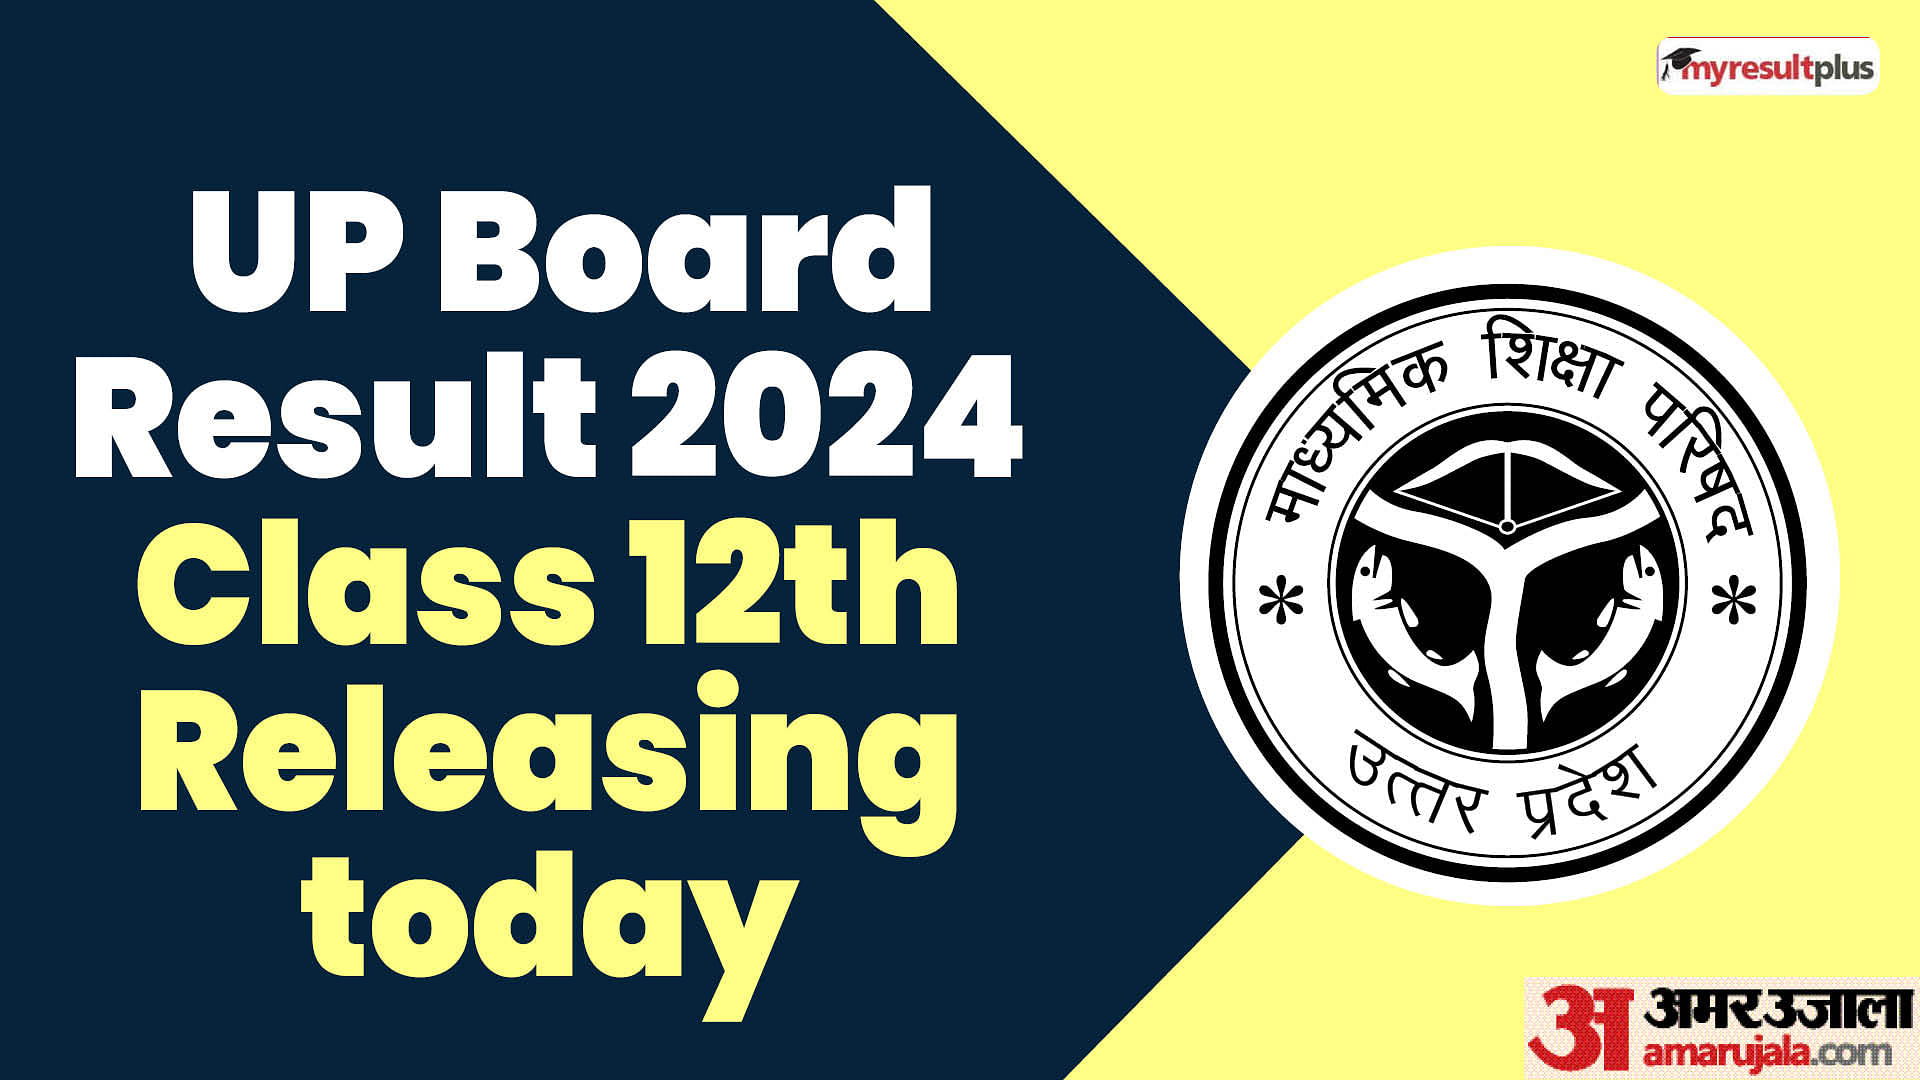 UP Board Class 12th Results 2024 releasing today, Once released check and download results here